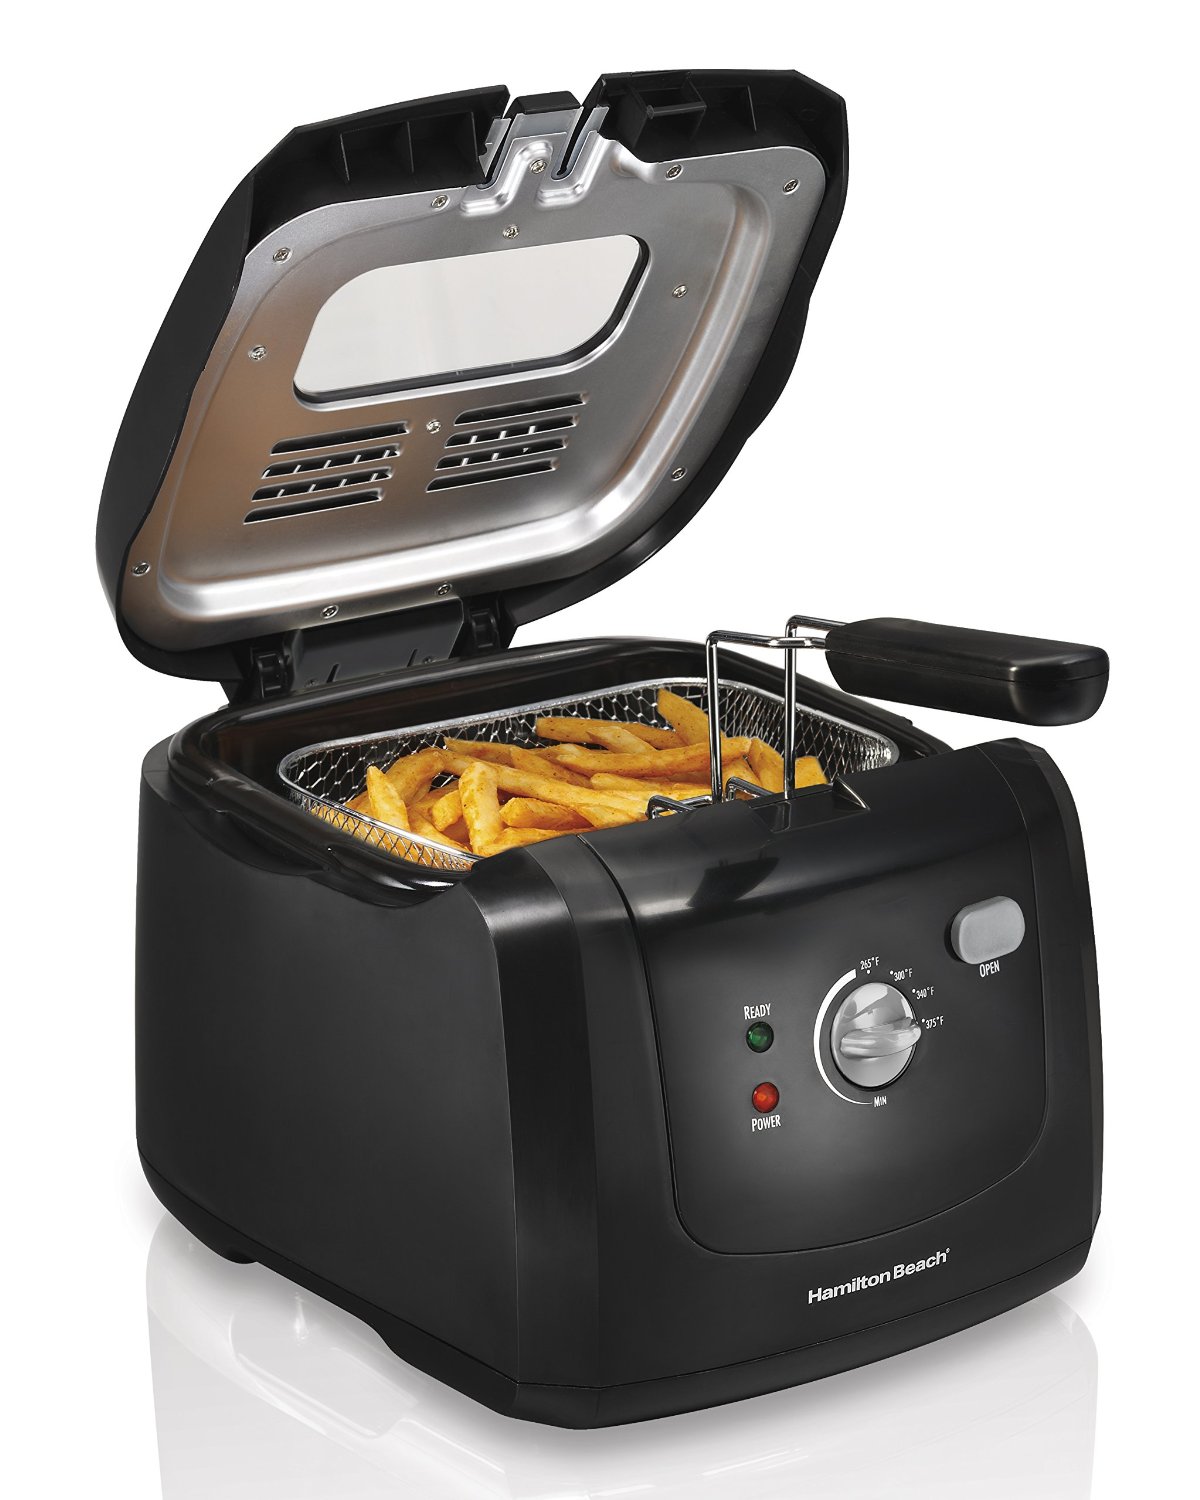 Hamilton Beach Deep Fryer with Cool Touch, 2-Liter Oil Capacity – Just $25.19!